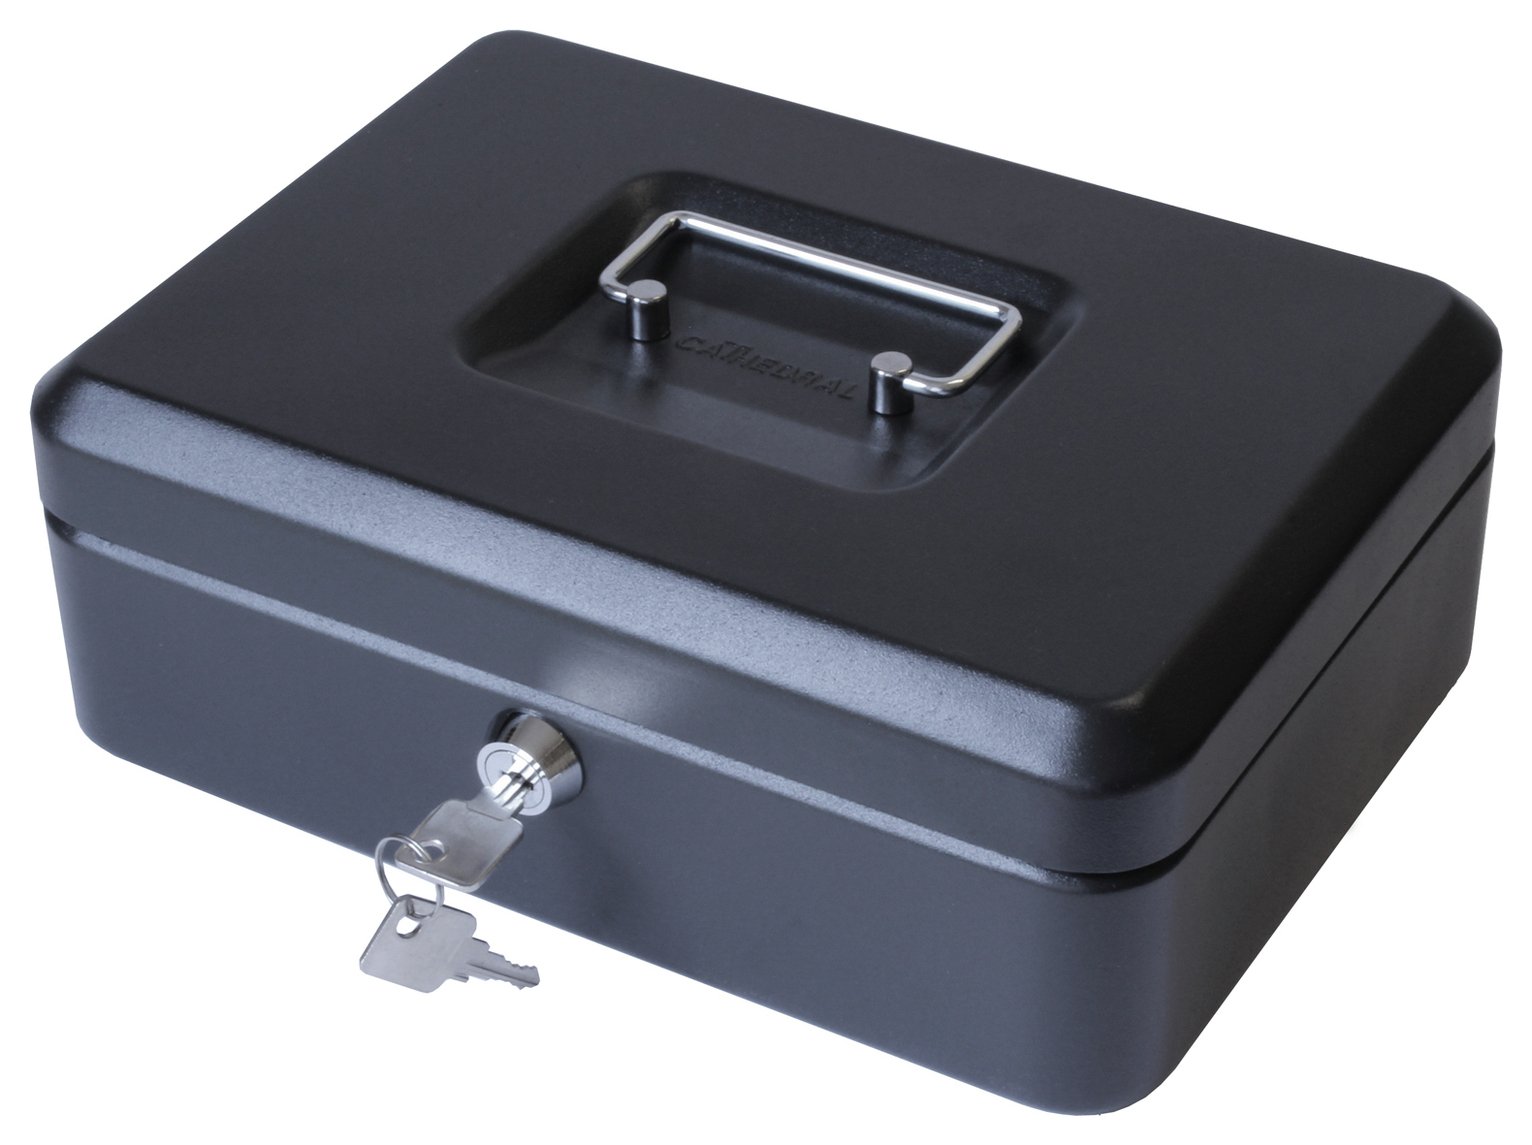 Cathedral 8 Inch Cash Box Review